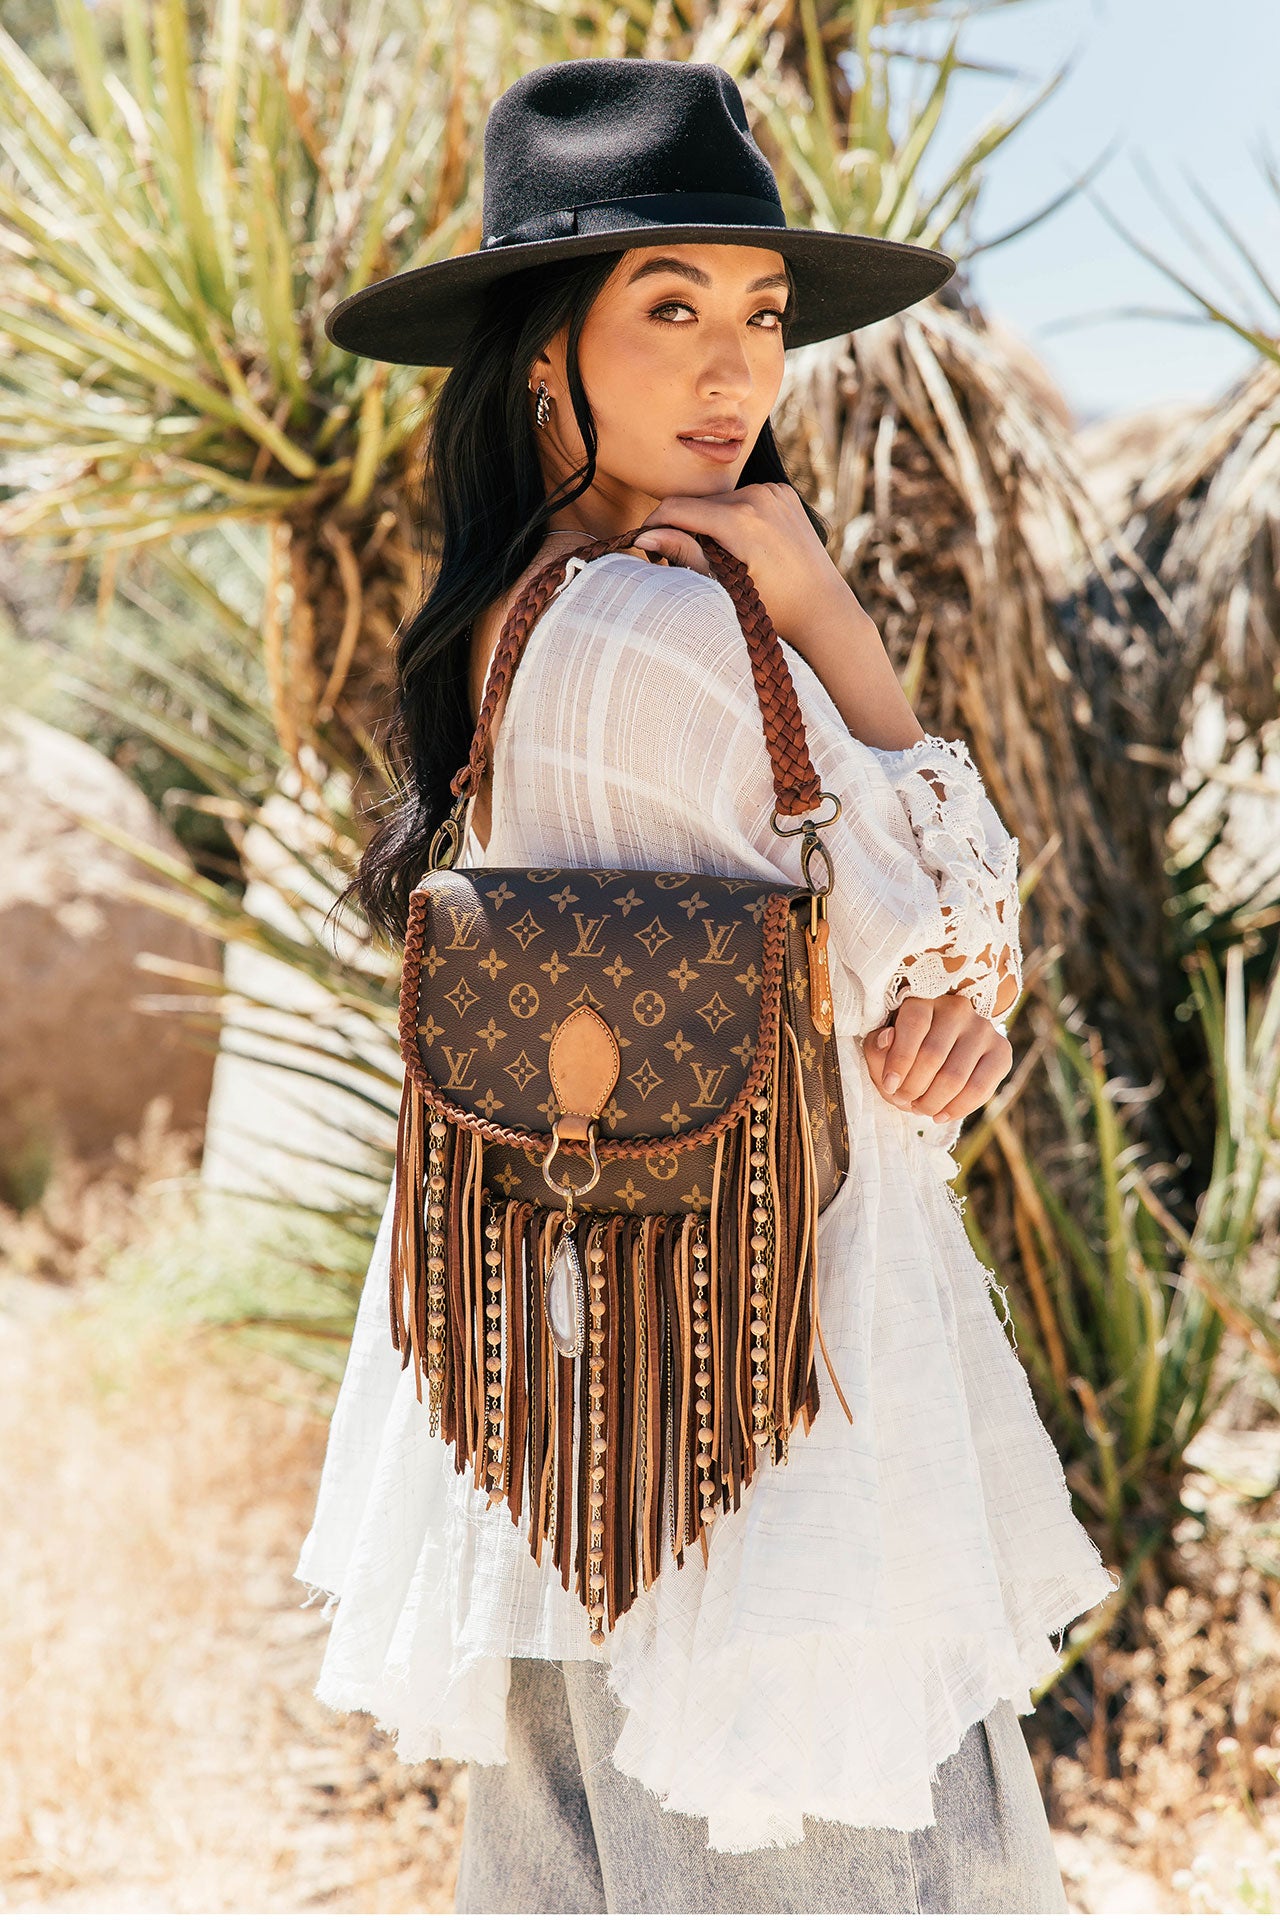 All Collection Bags – Vintage Boho Bags